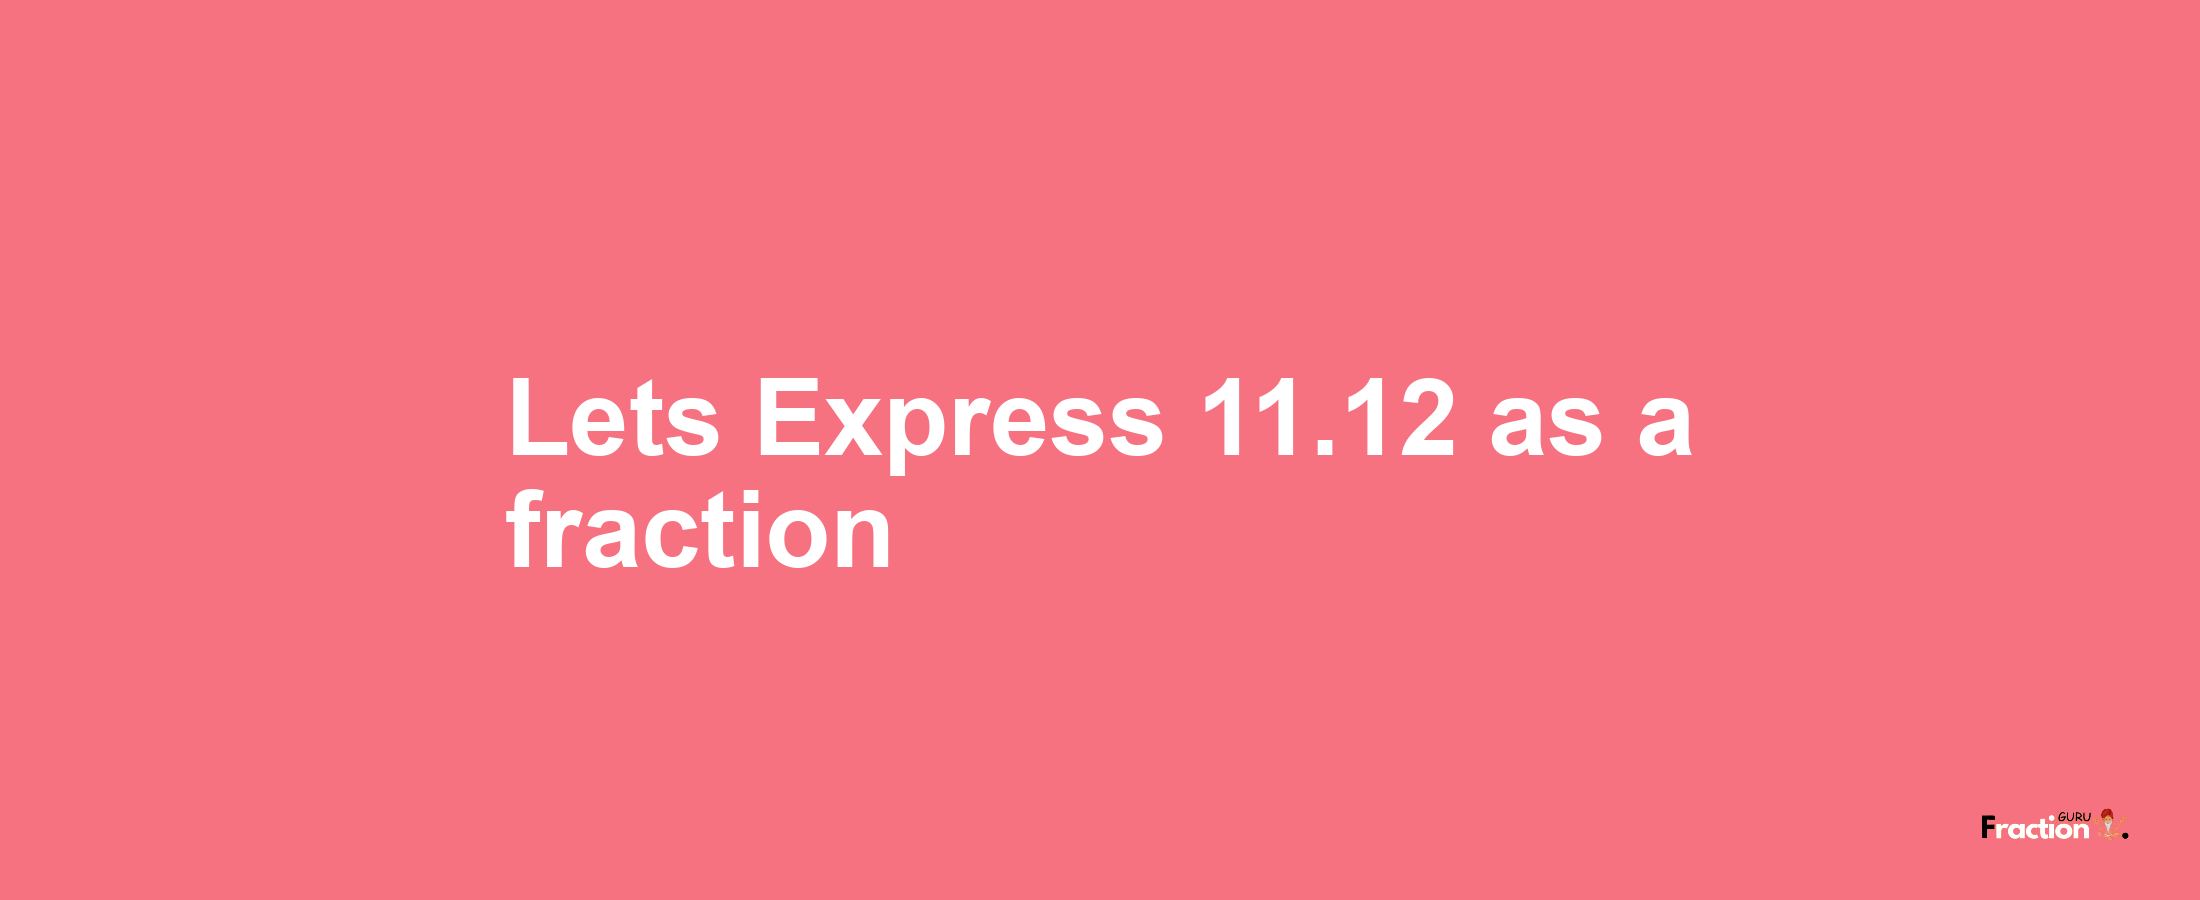 Lets Express 11.12 as afraction